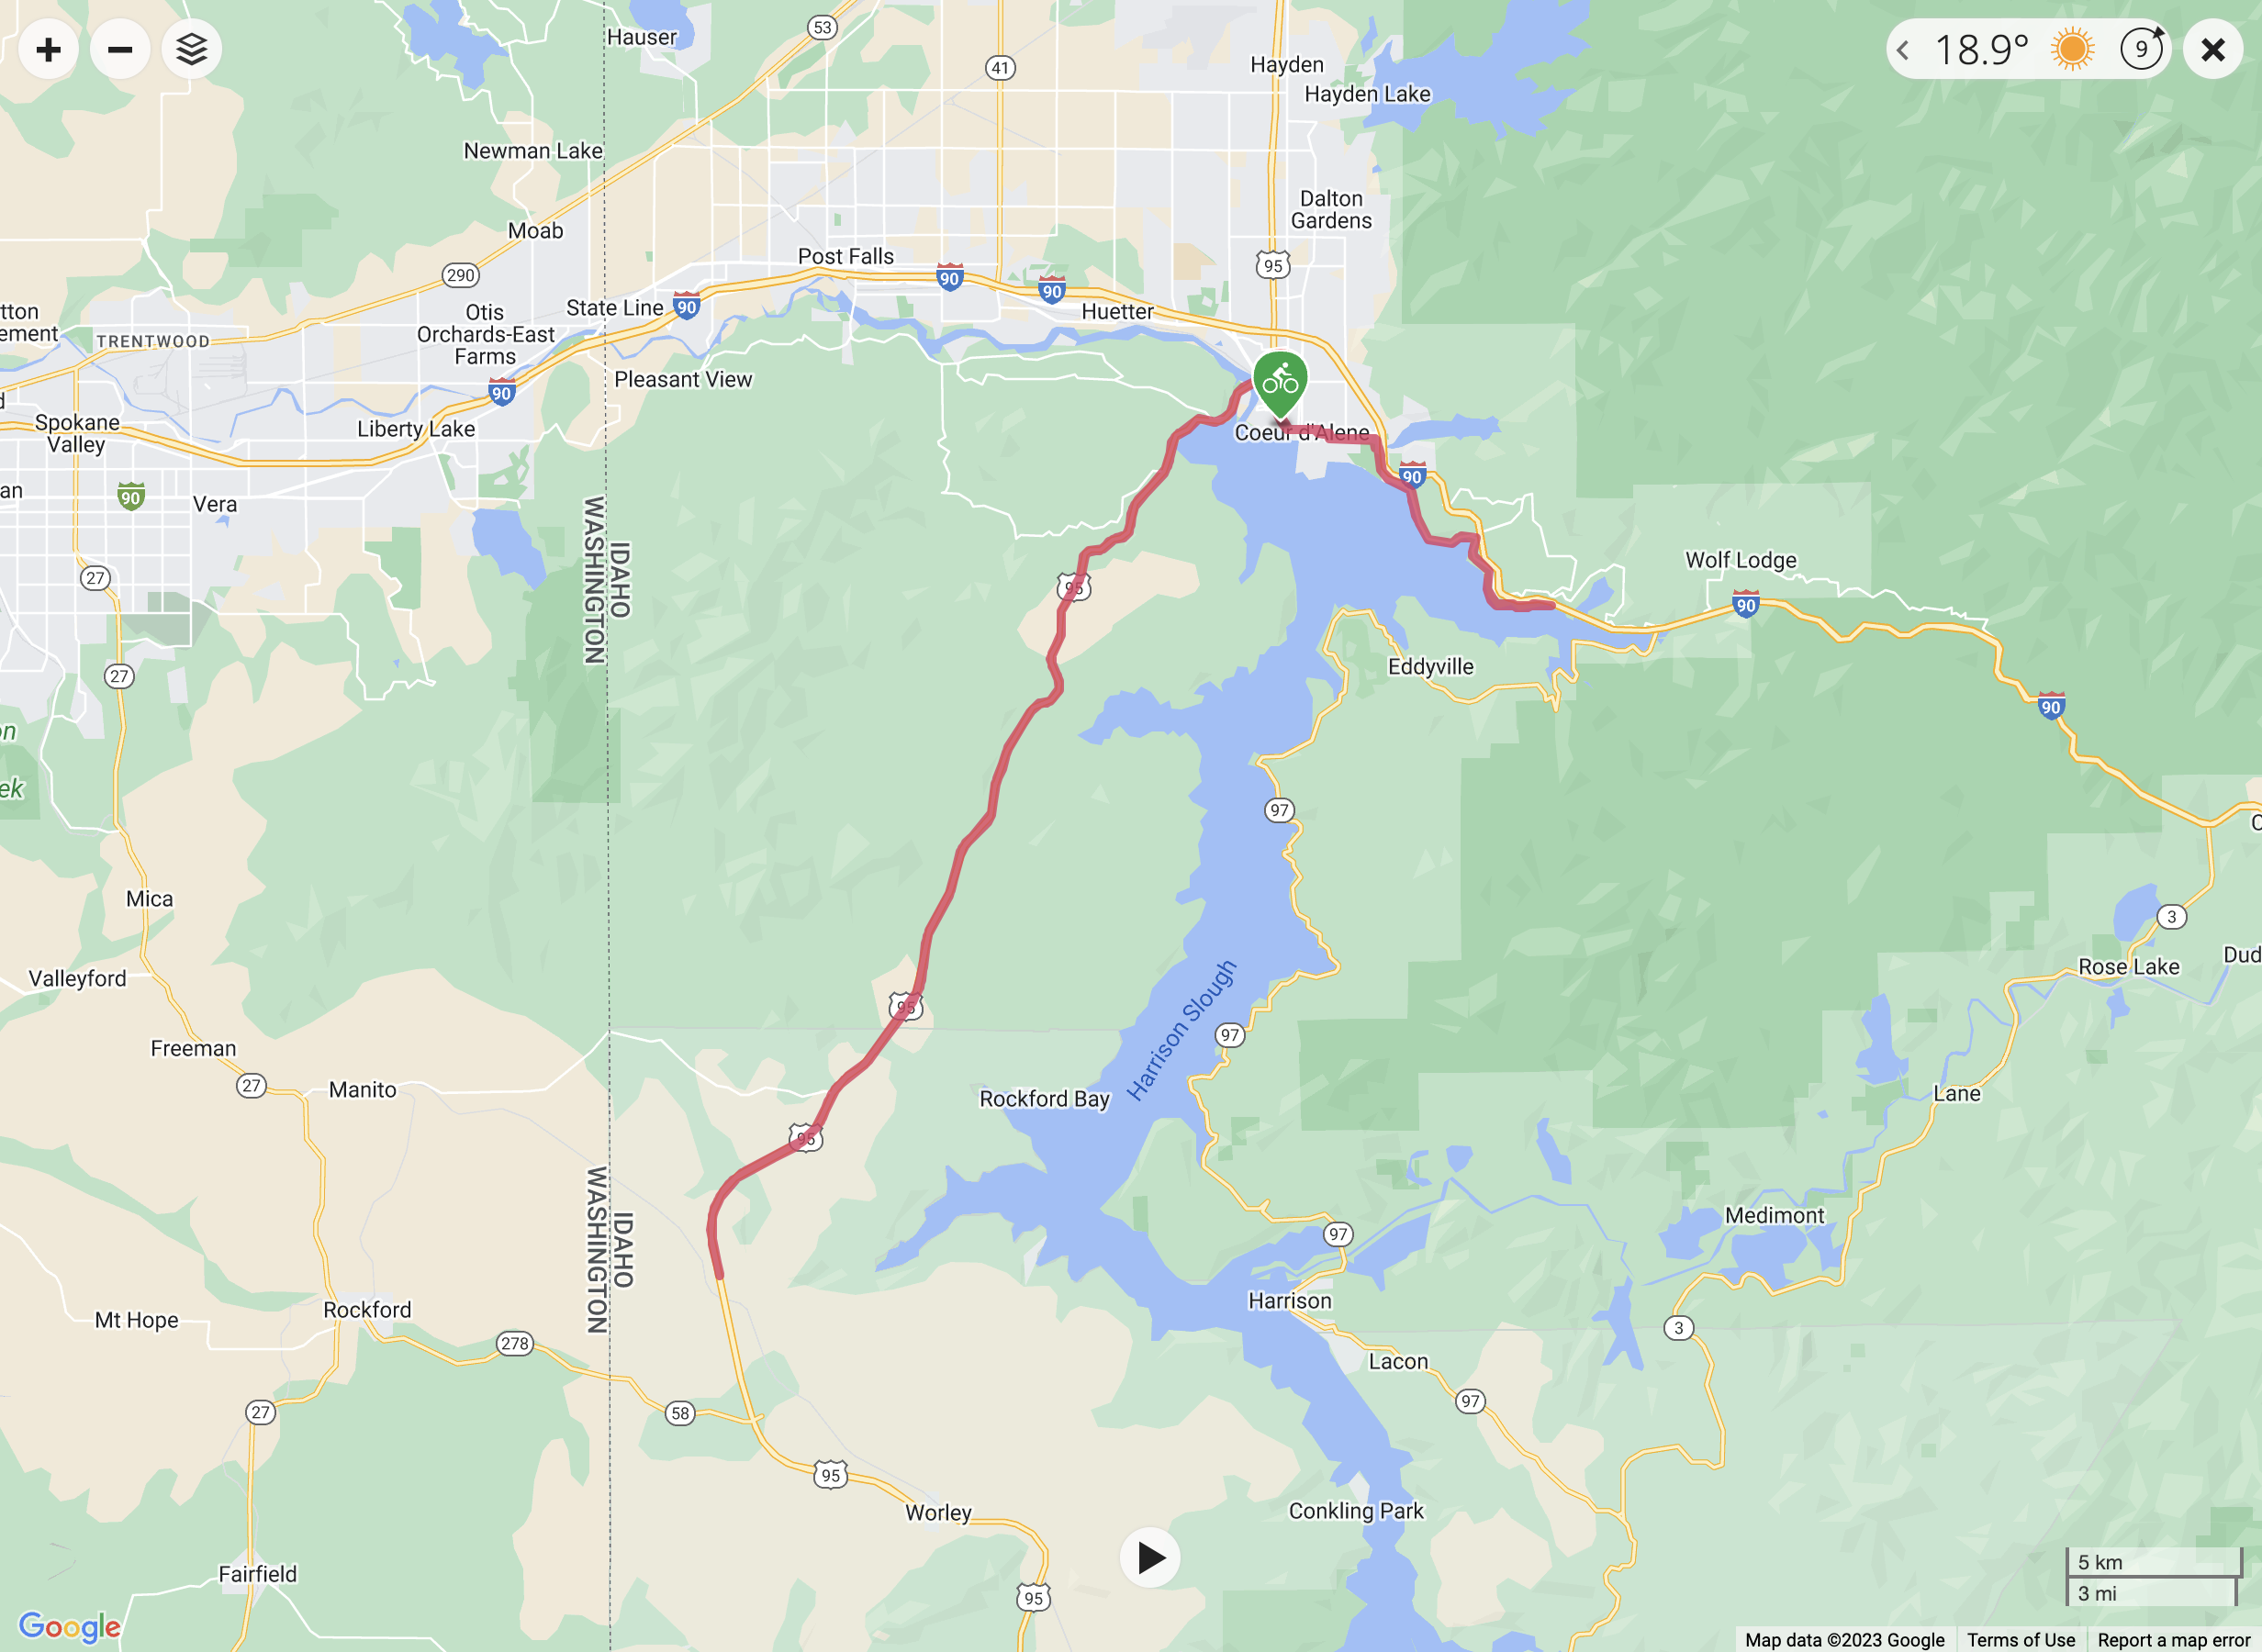 A screenshot of a Garmin Connect map showing the bike course for Ironman Coeur d'Alene.